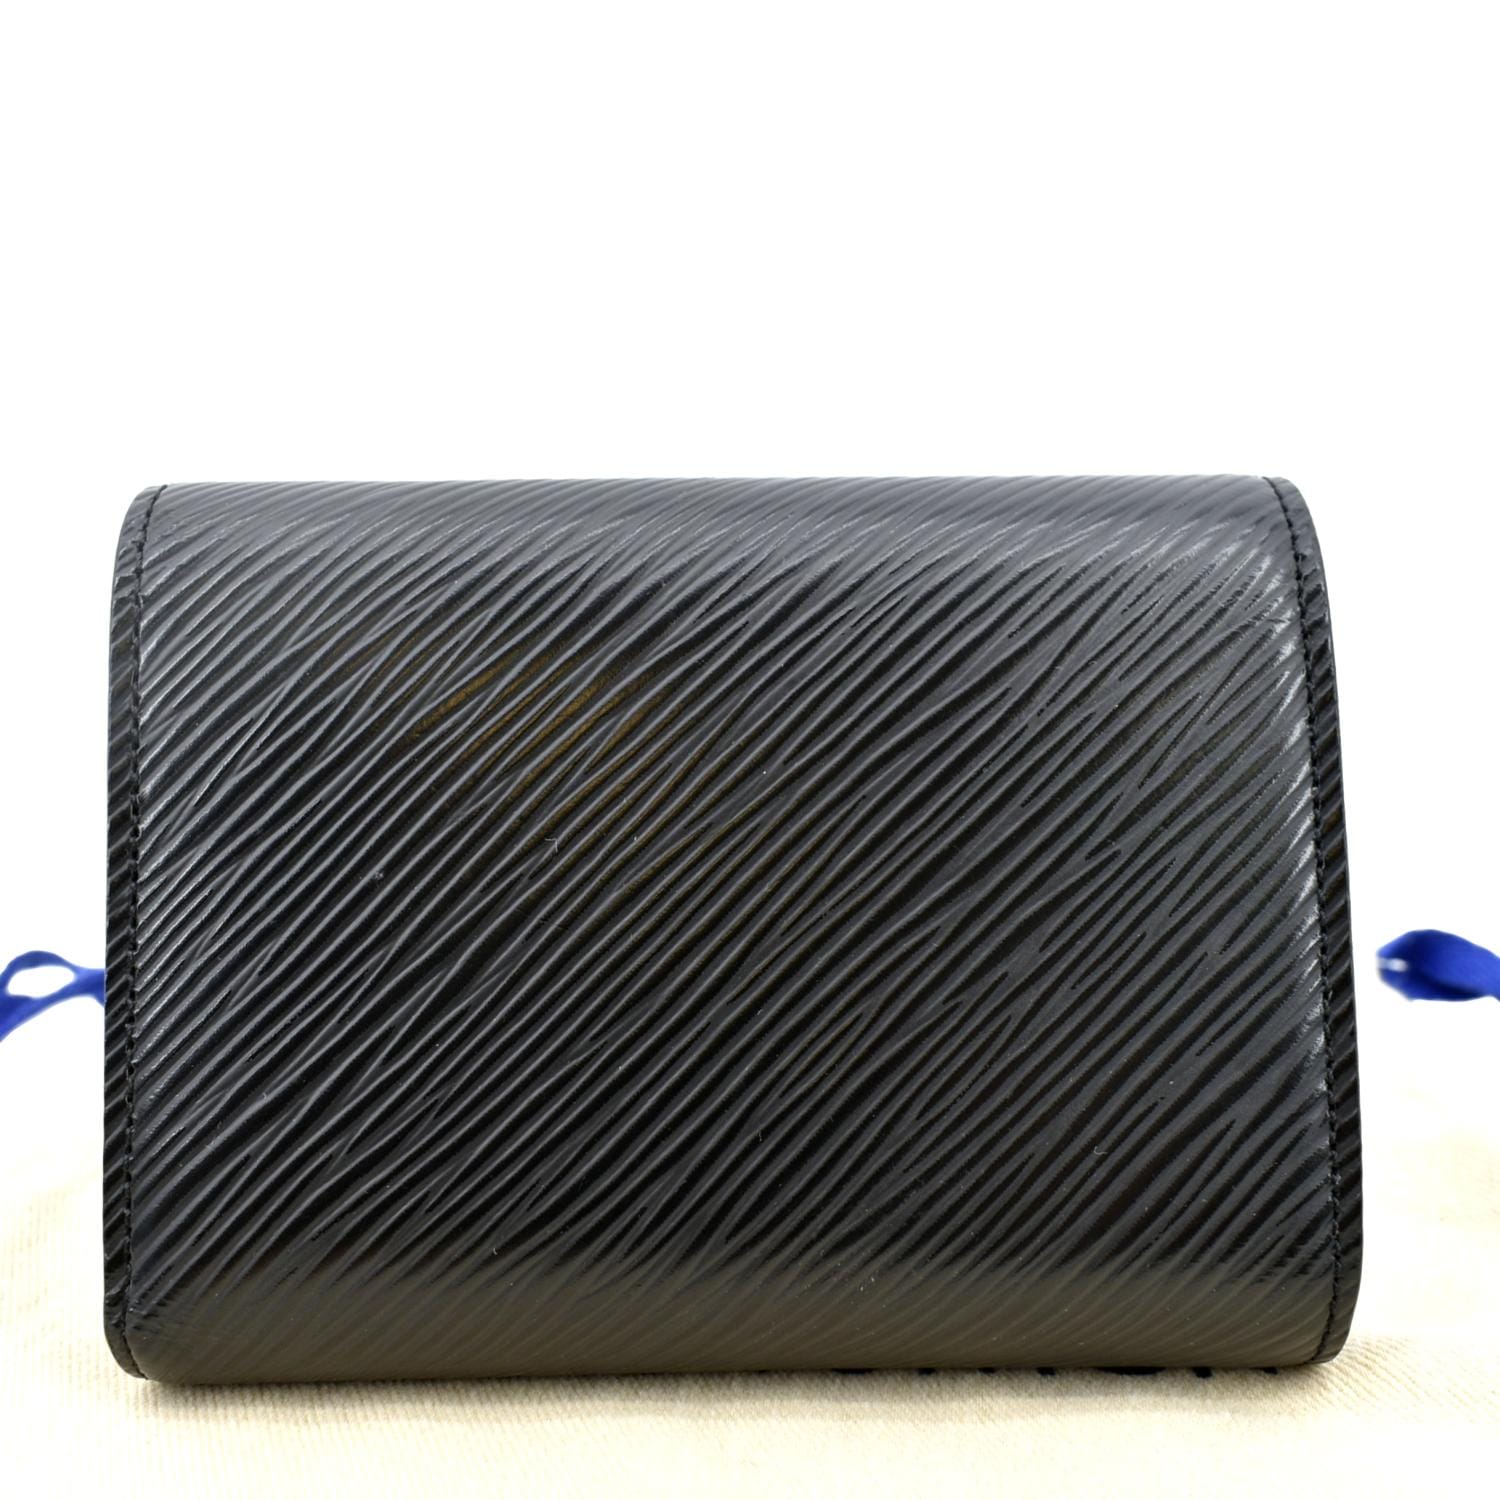 Twist Wallet Epi Leather - Wallets and Small Leather Goods